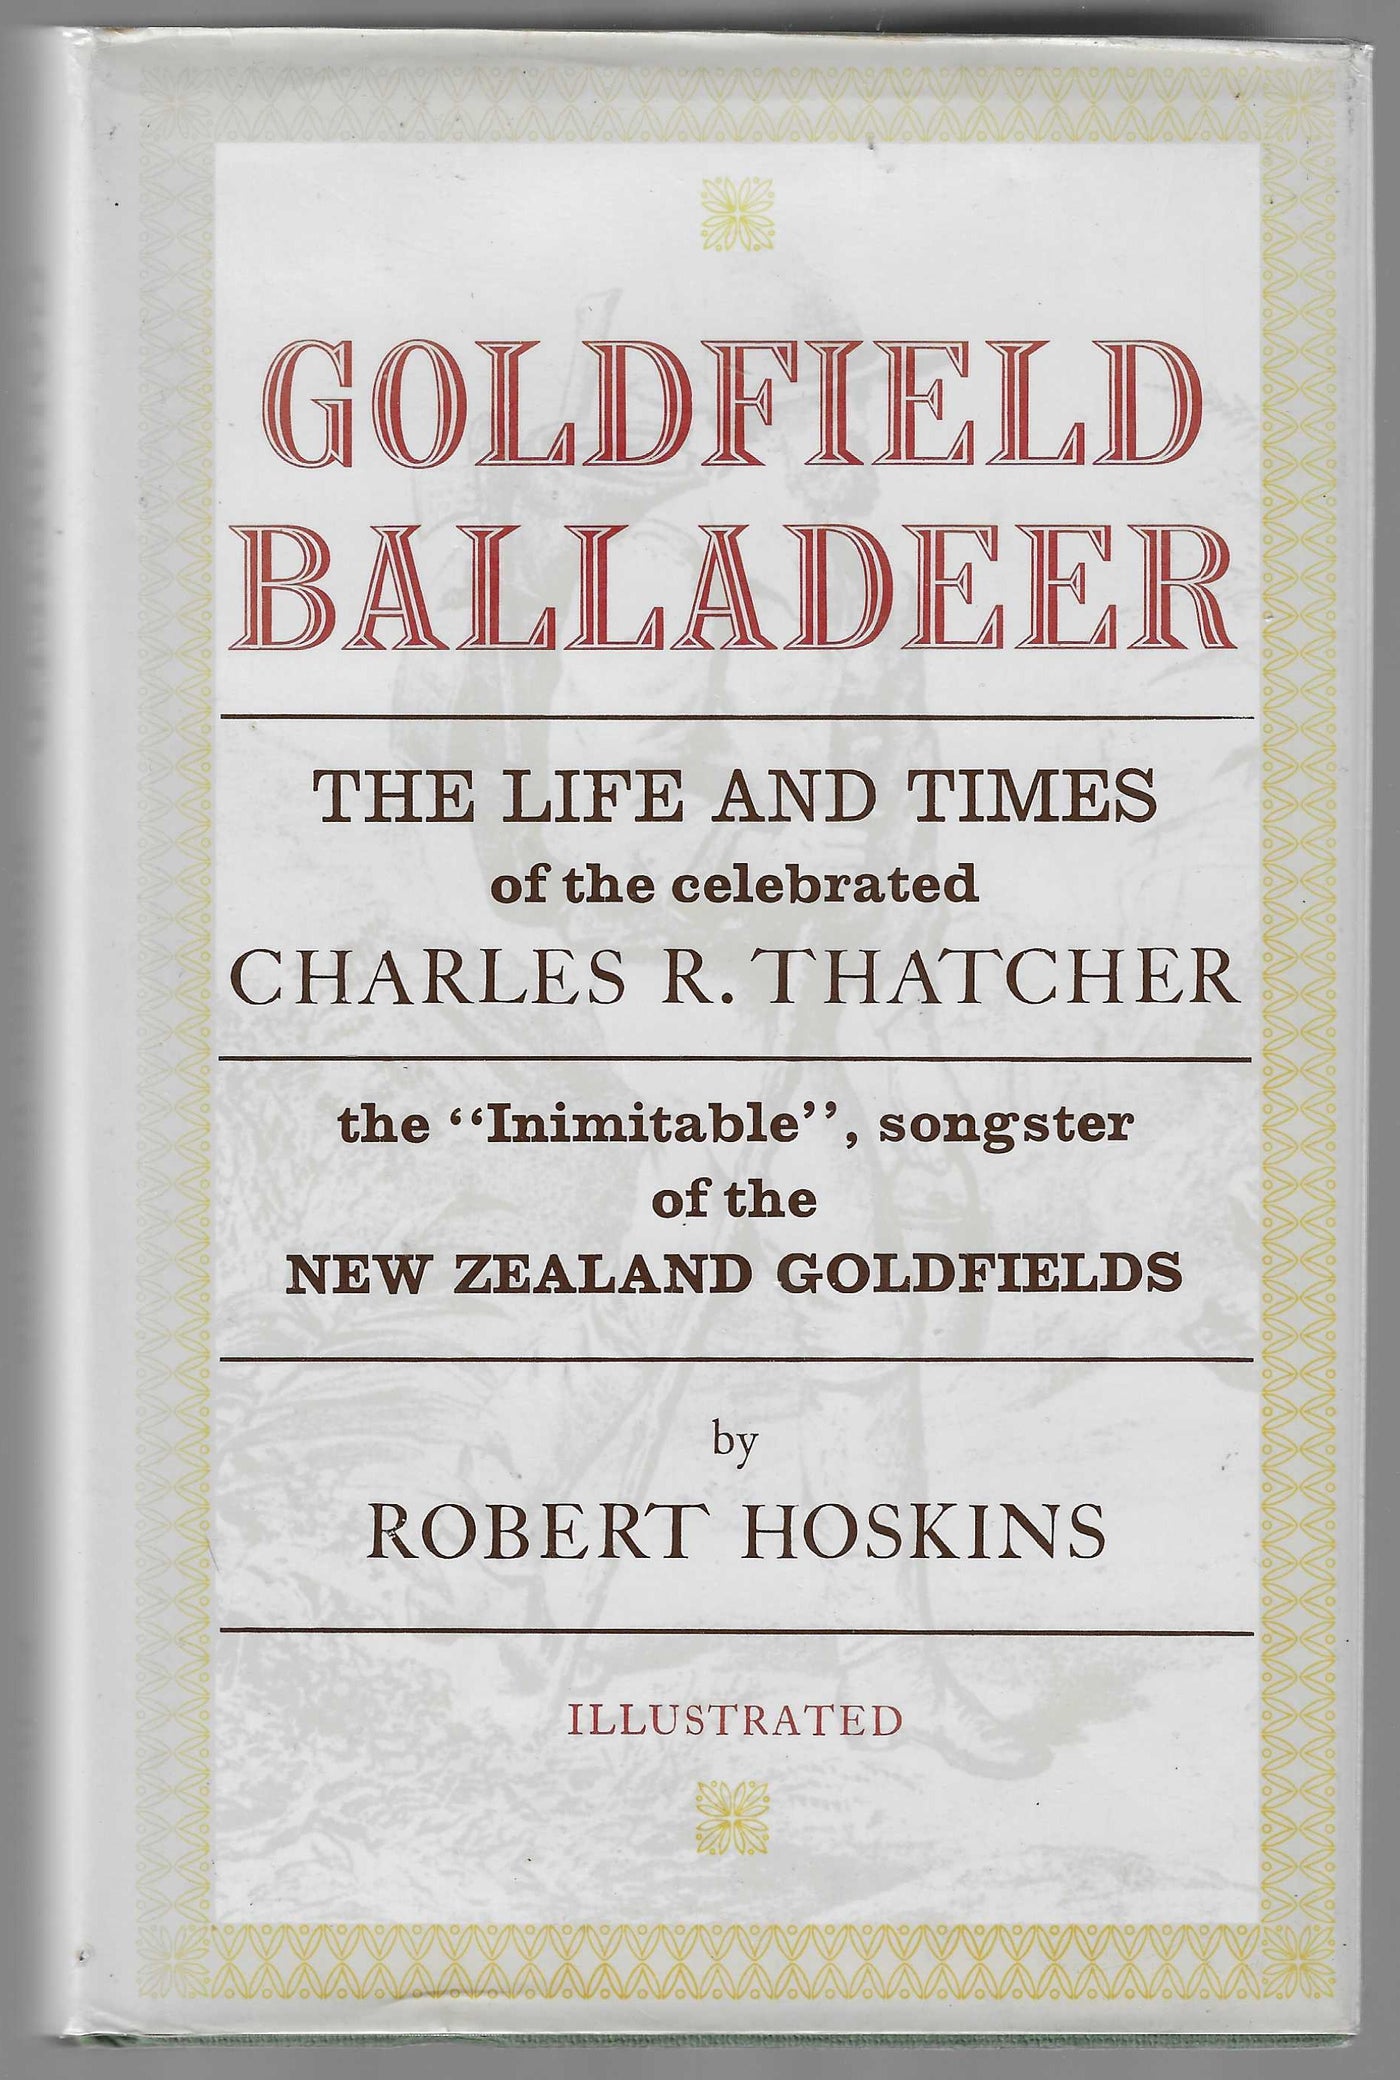 Goldfield Balladeer: The Life and Times of the Celebrated Charles R. Thatcher the "Inimitable" songster of the New Zealand Goldfields